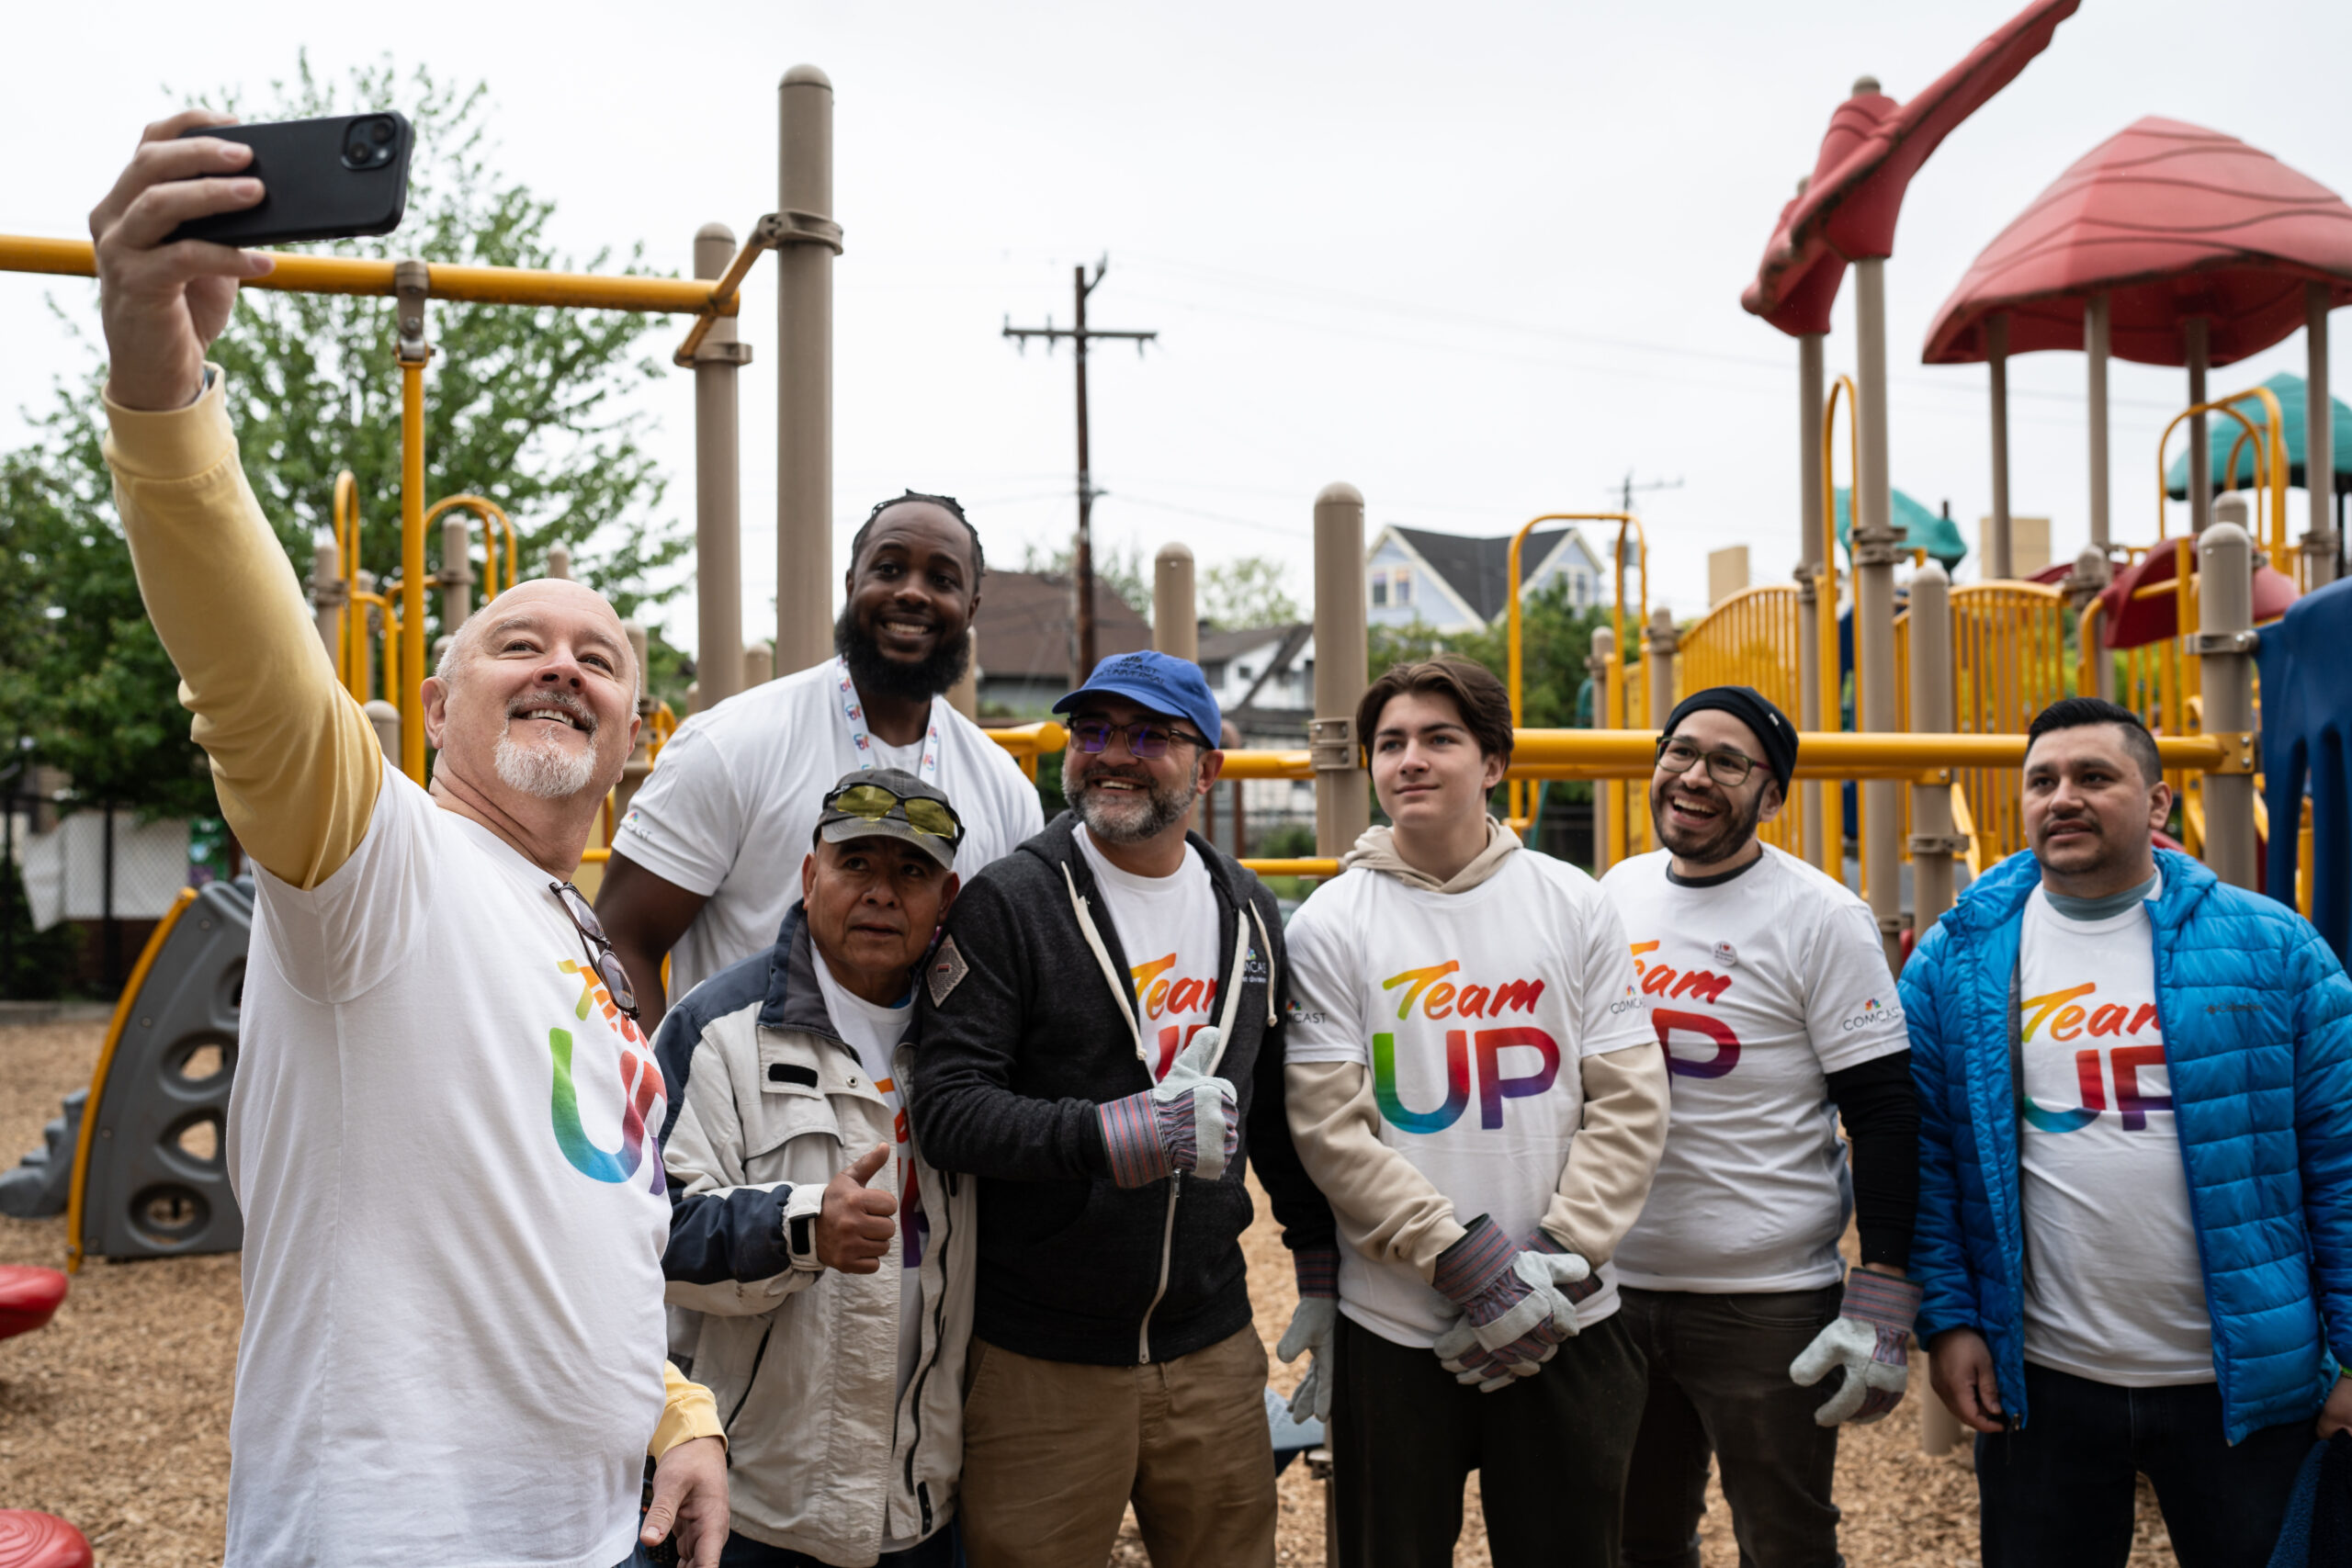 Comcast volunteers pose for a photo in a playground.